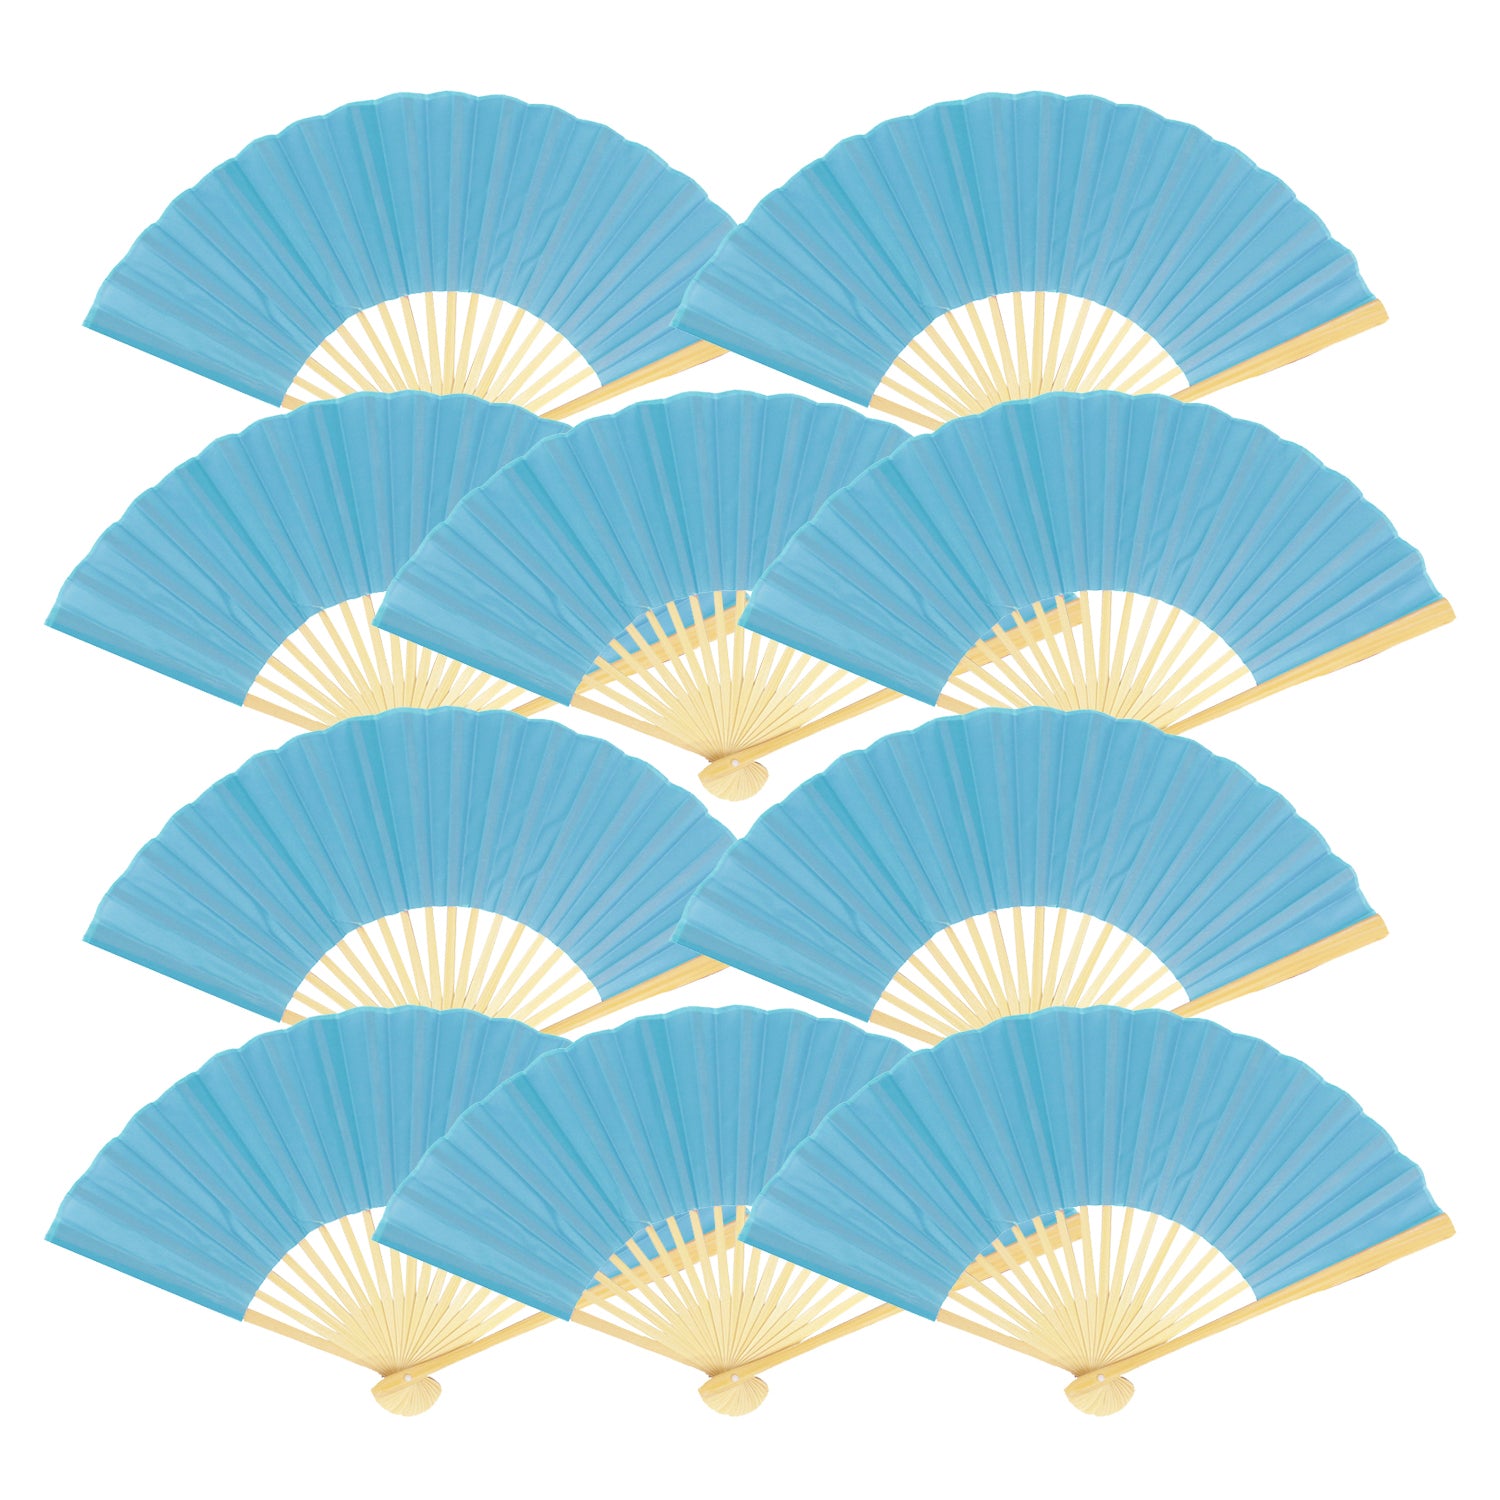 9 Inch Turquoise Silk Hand Fans For Weddings 10 Pack On Sale Now Oriental Paper Folding Wedding Hand Fans Cheap On Sale At Bulk Wholesale Best Prices